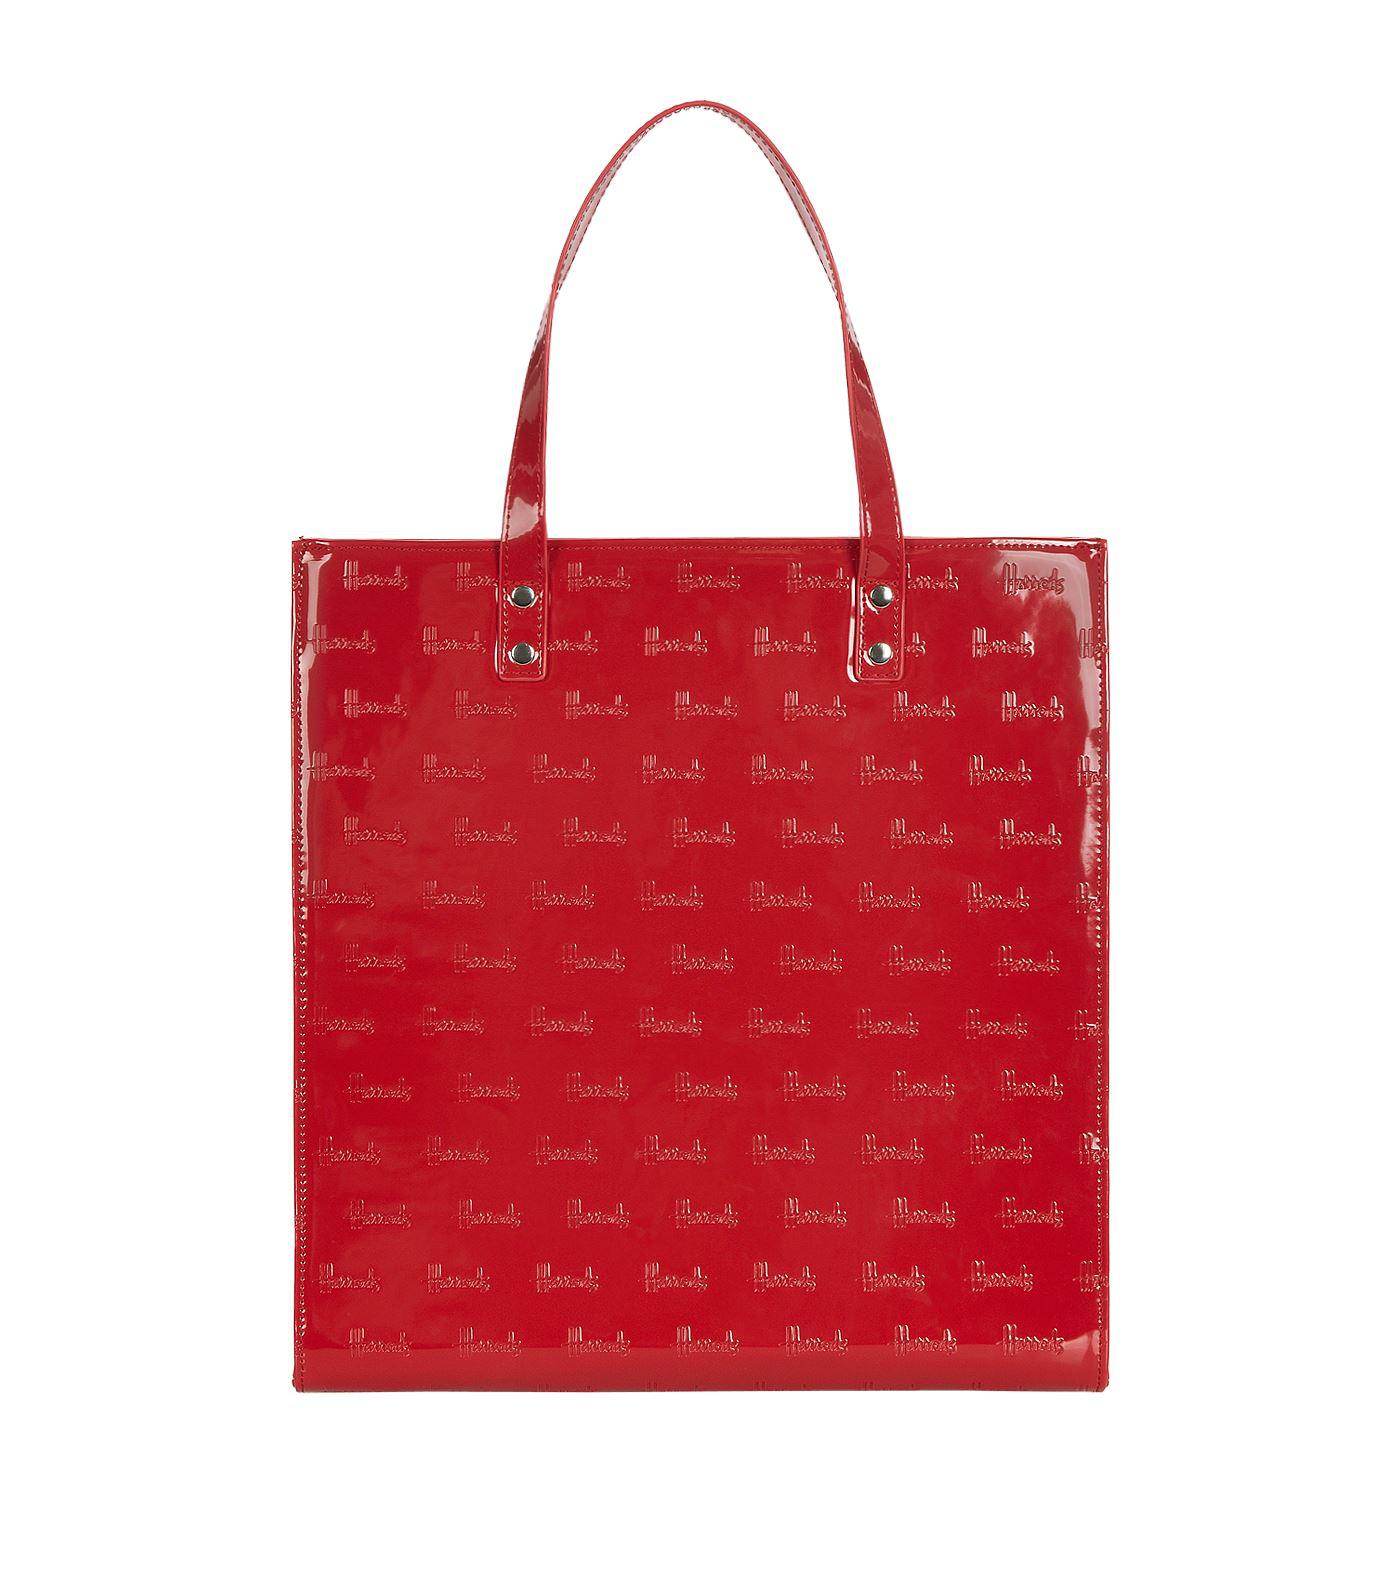 Lyst - Harrods Large Debossed Boxy Tote Bag in Red